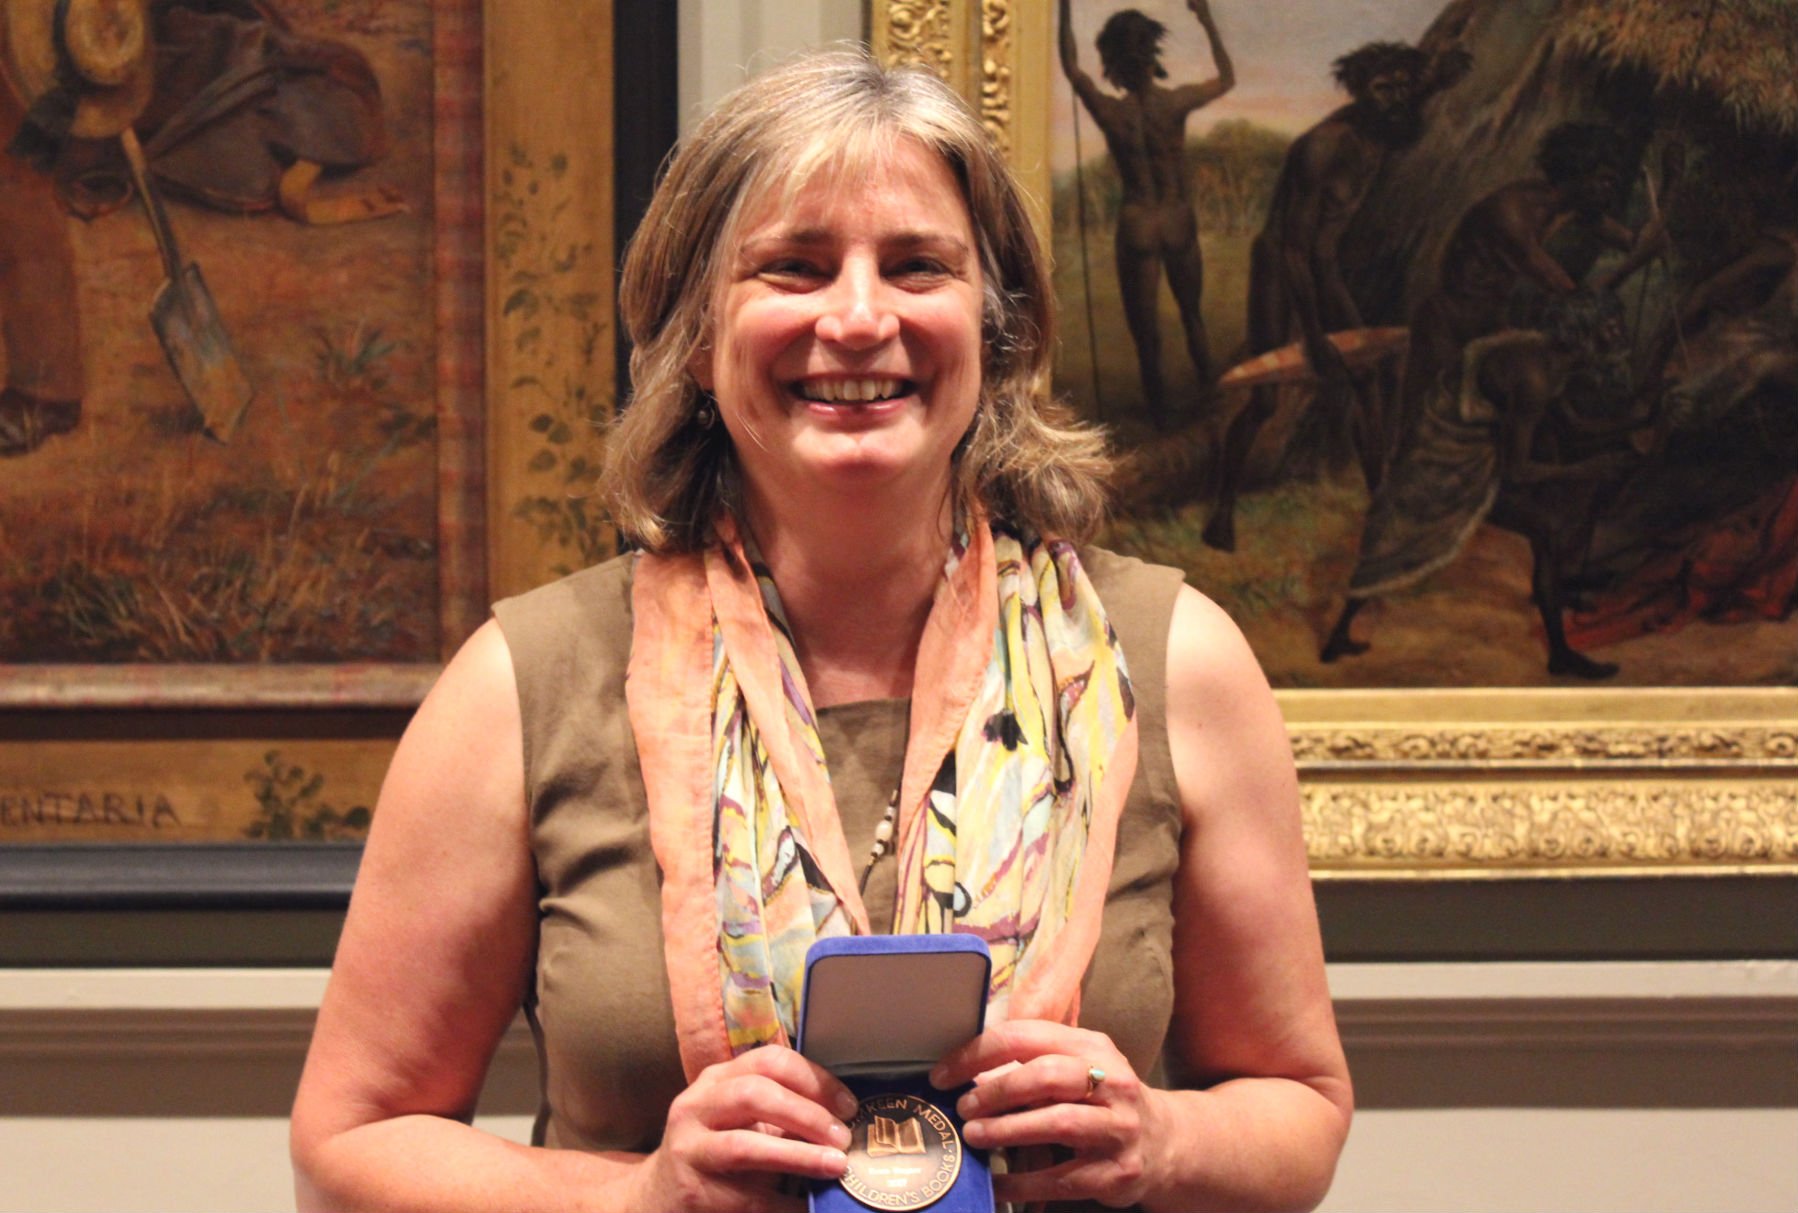 A woman holding a medal